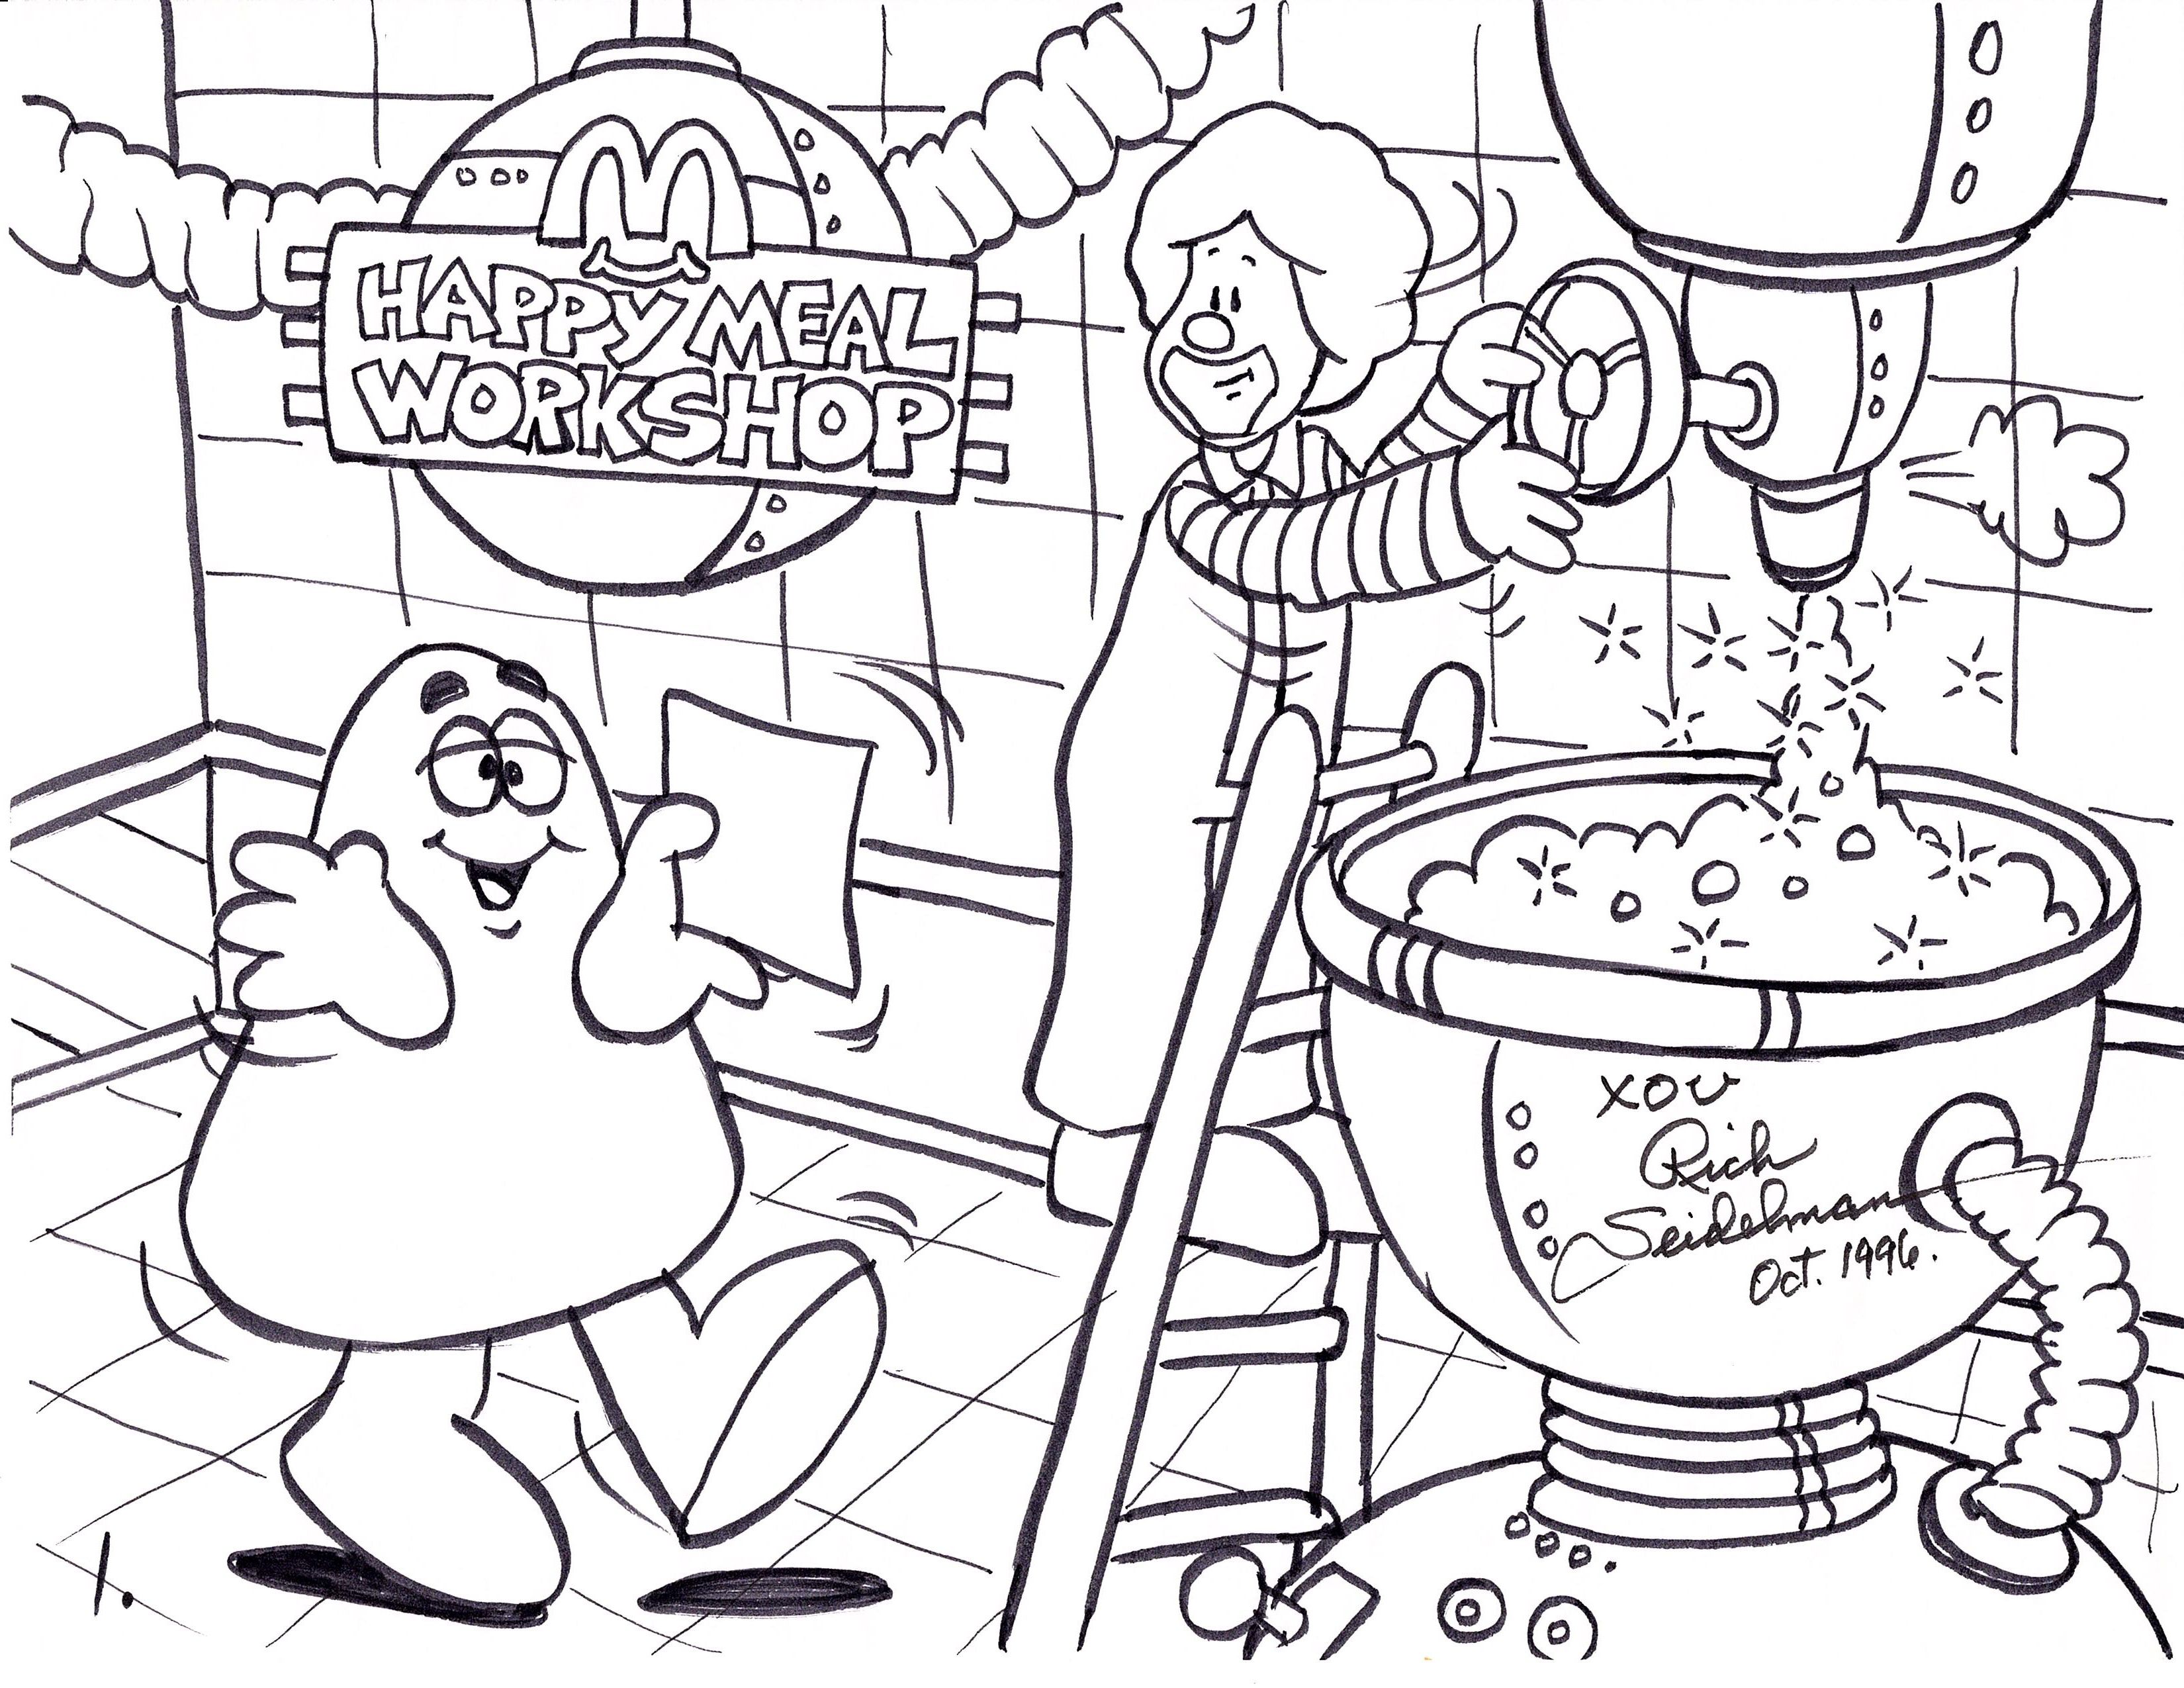 Looks like Grimace has written a poem about The Happy Meal Workshop, and is  eager to share it with Ronald McD… | Coloring pages, Coloring book pages,  Coloring books